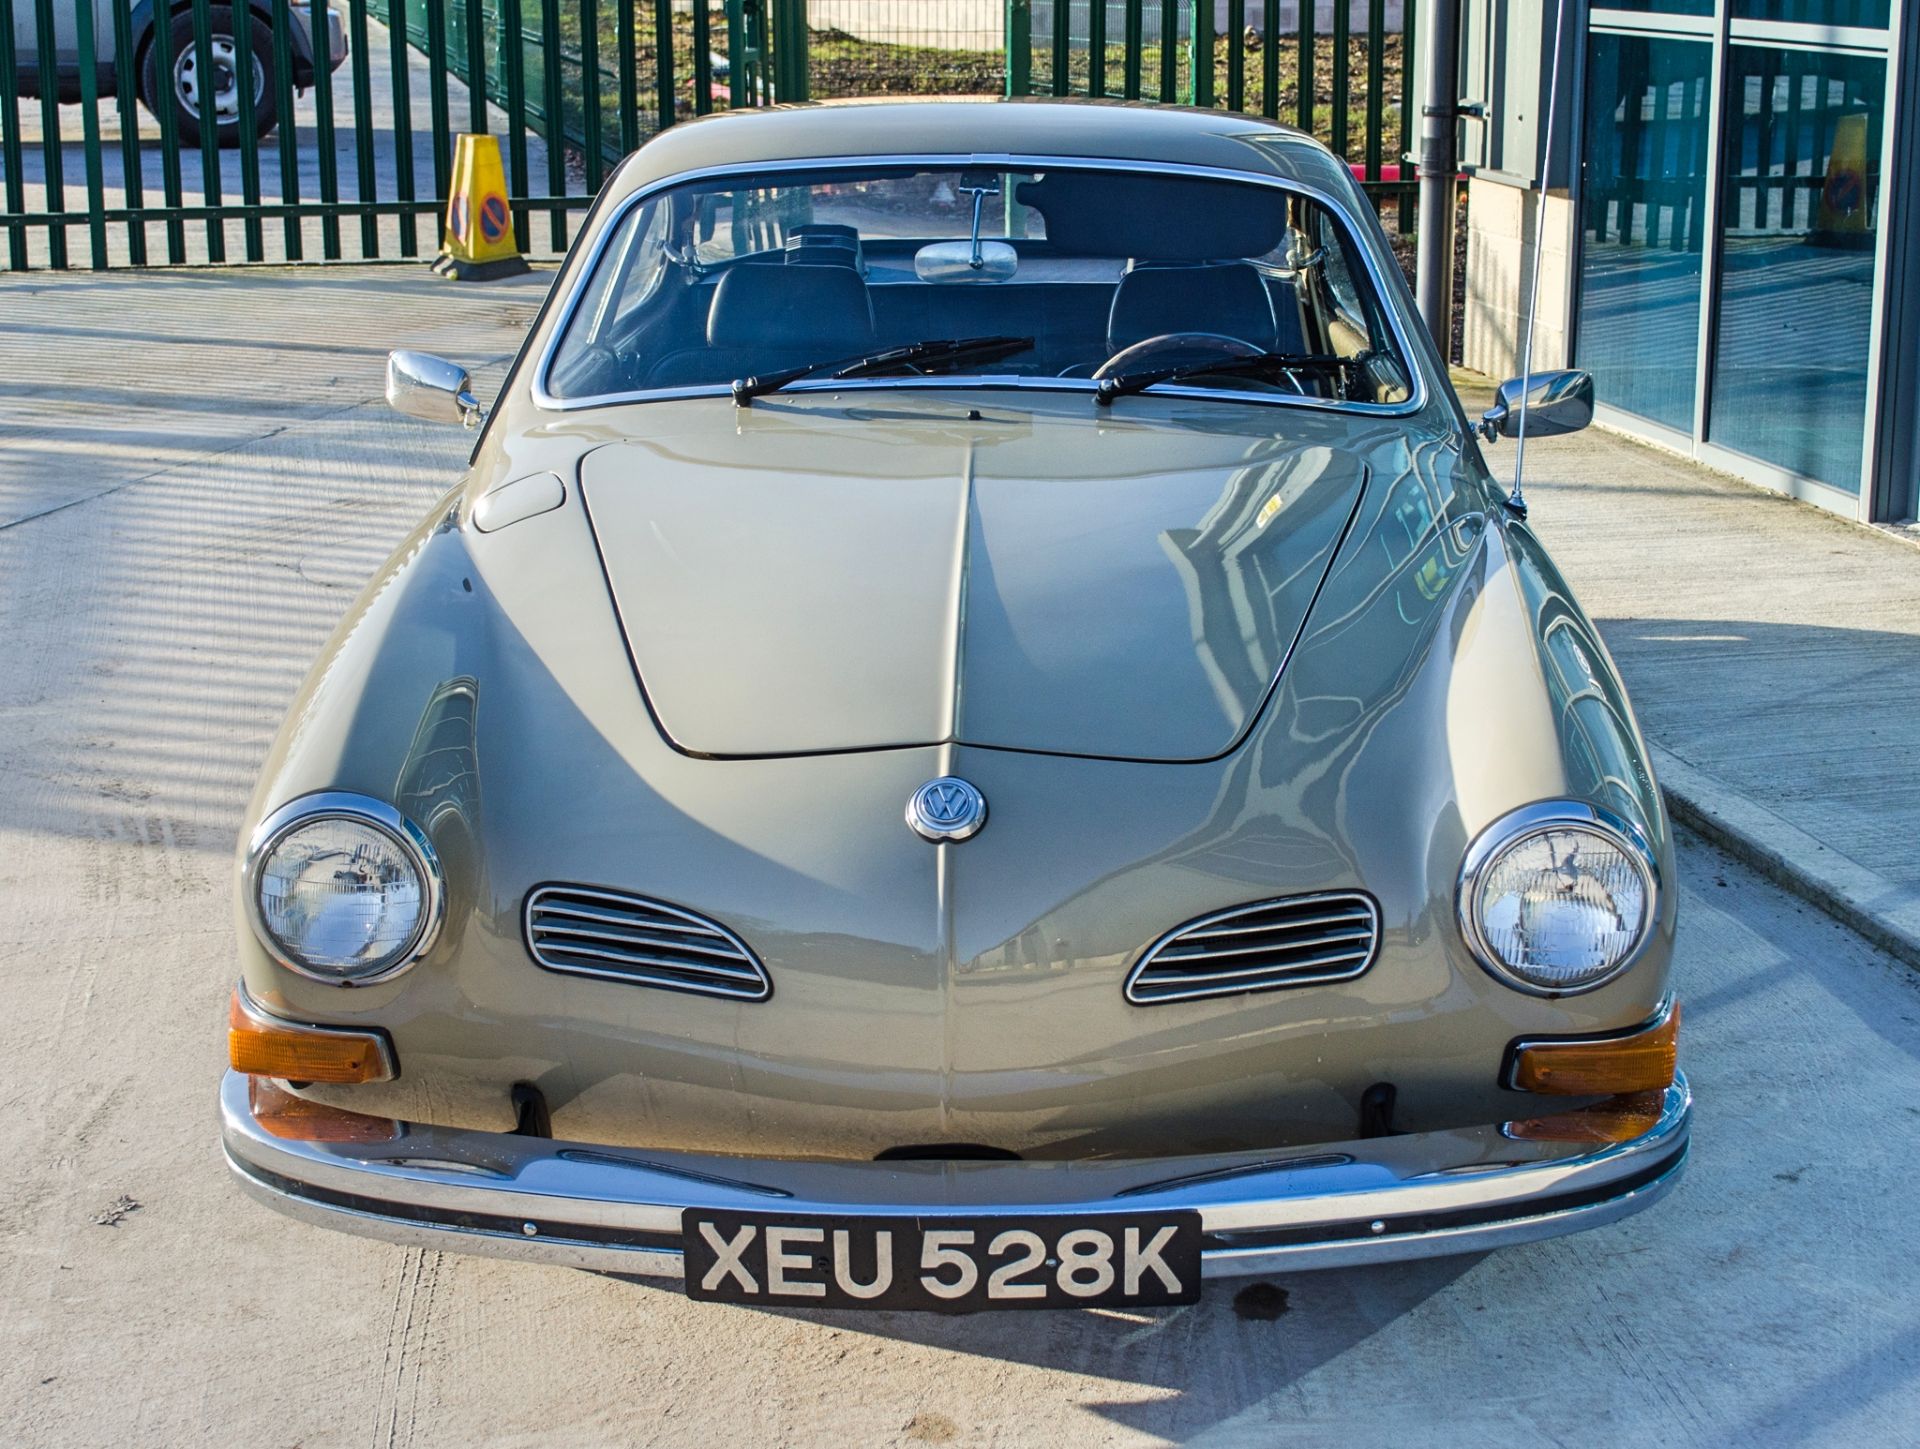 1972 Volkswagen Karmann Ghia 1641cc two door coupe - Image 10 of 52